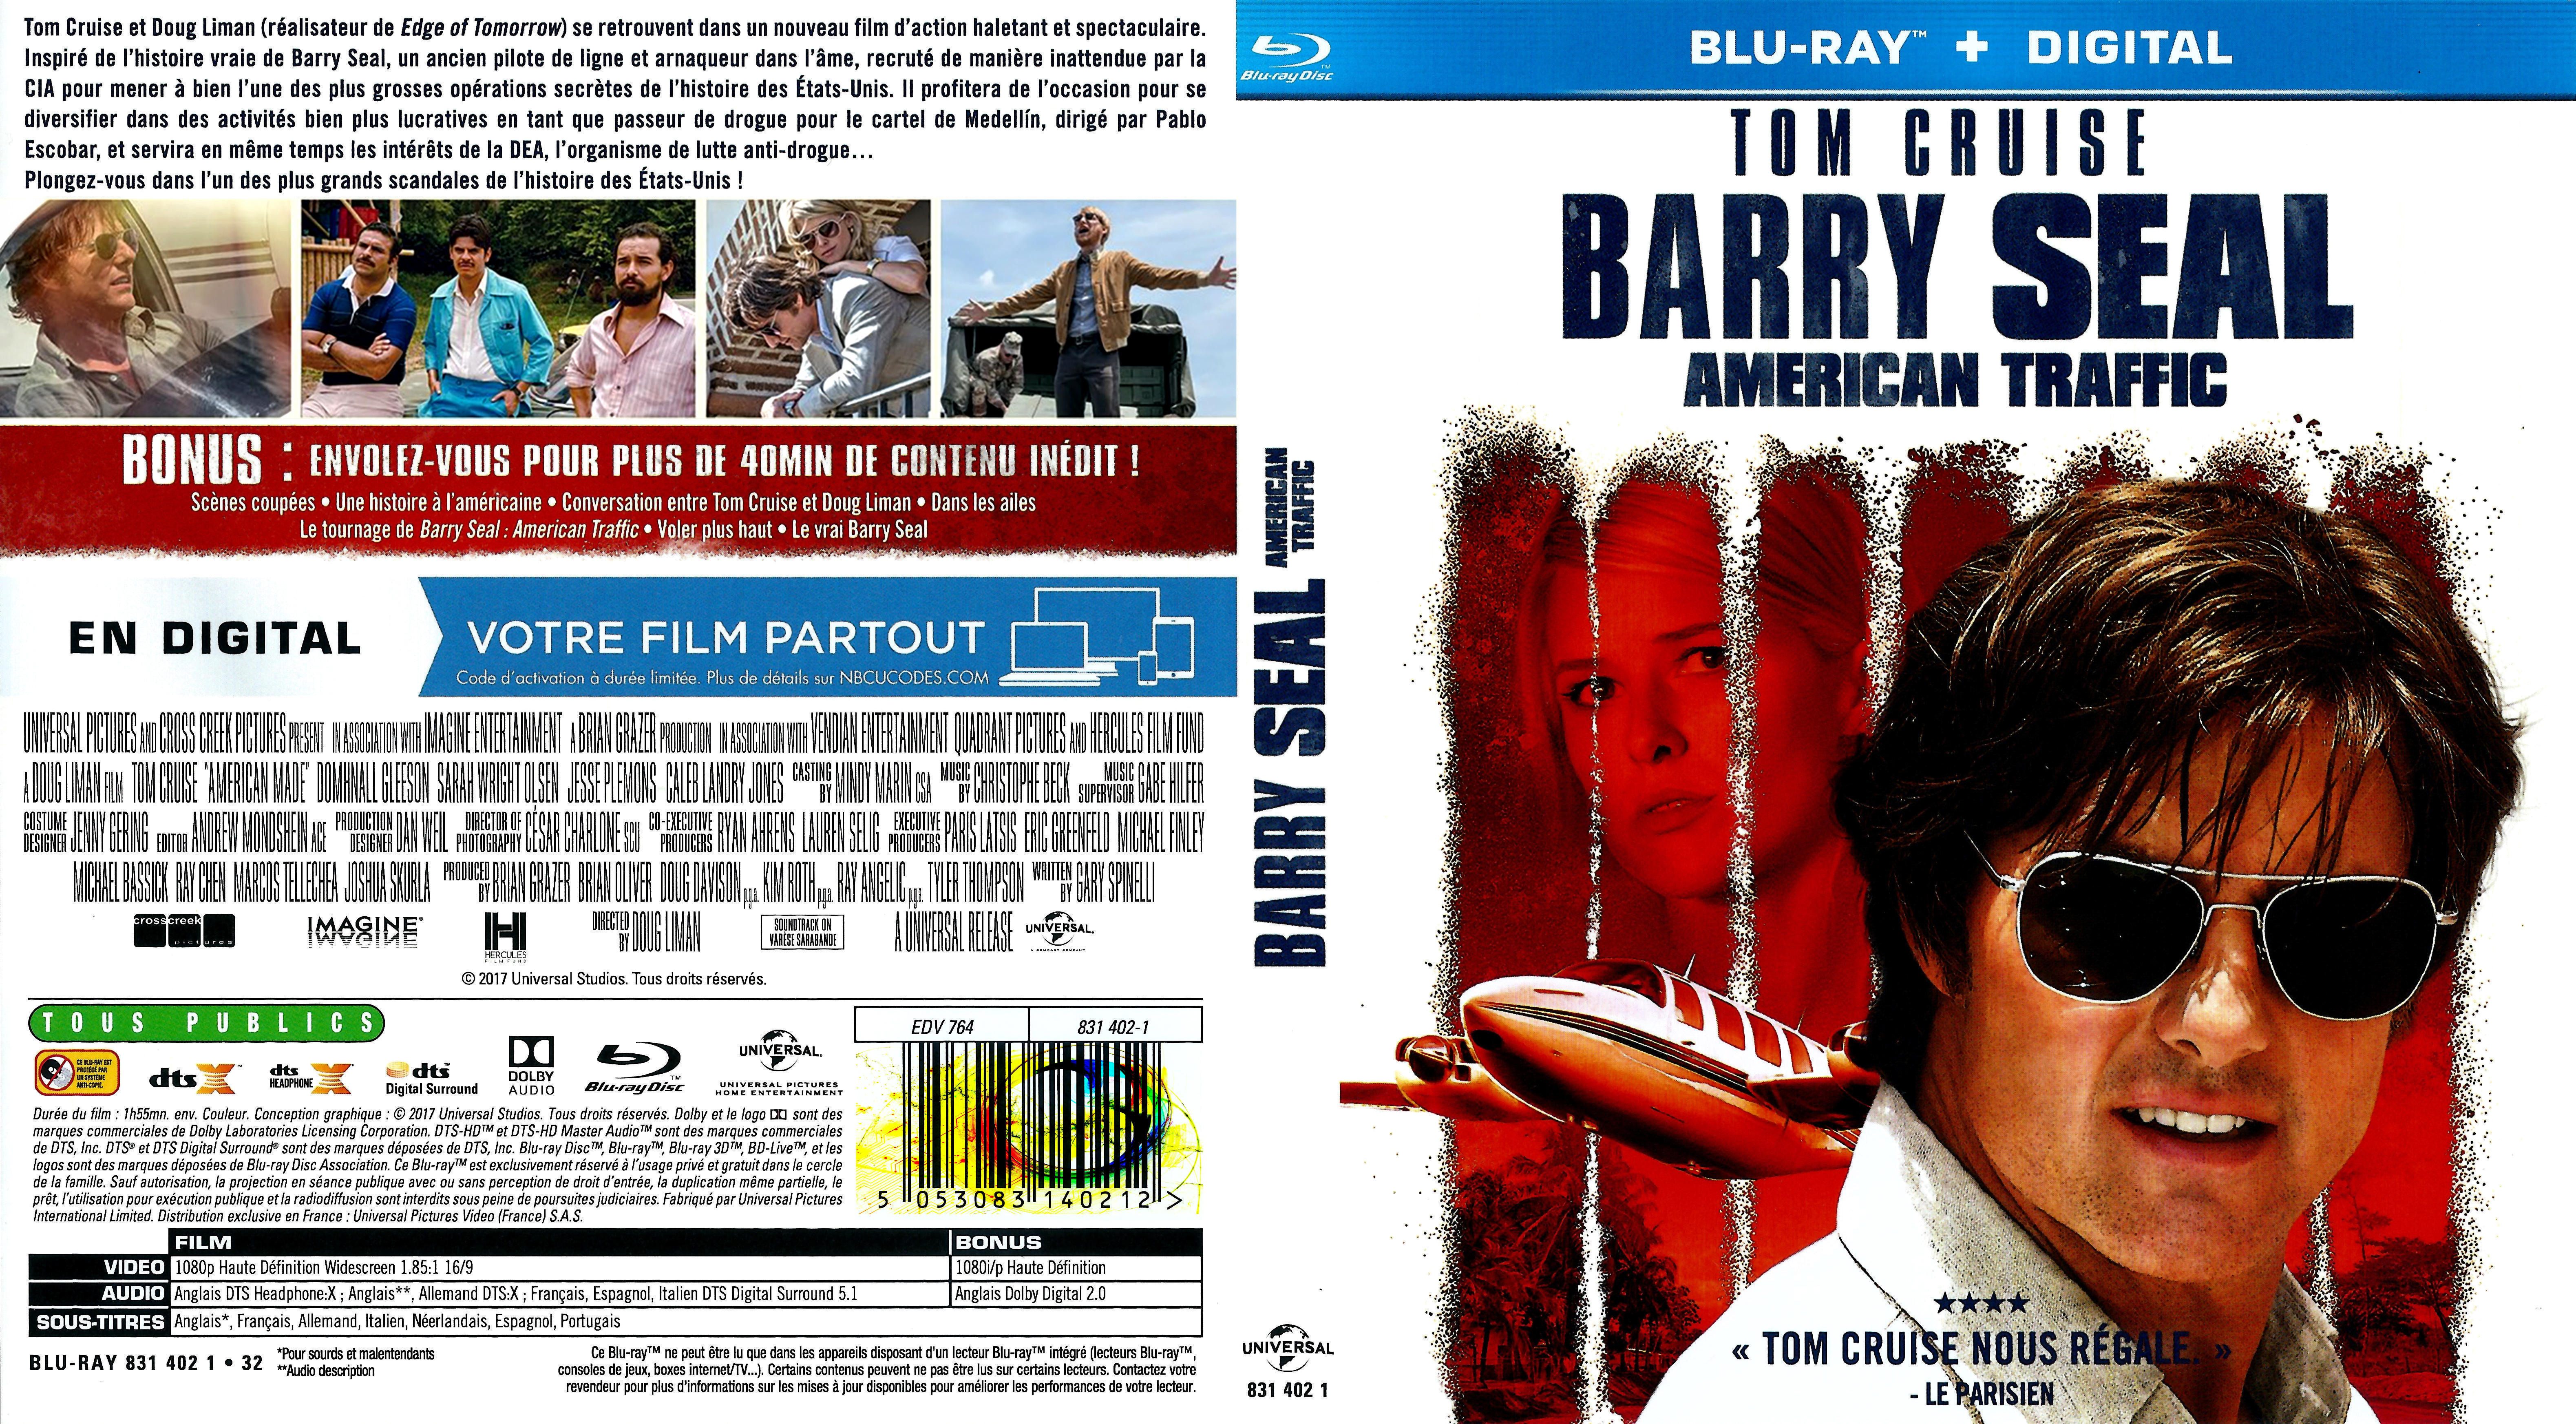 Jaquette DVD Barry Seal american traffic (BLU-RAY)